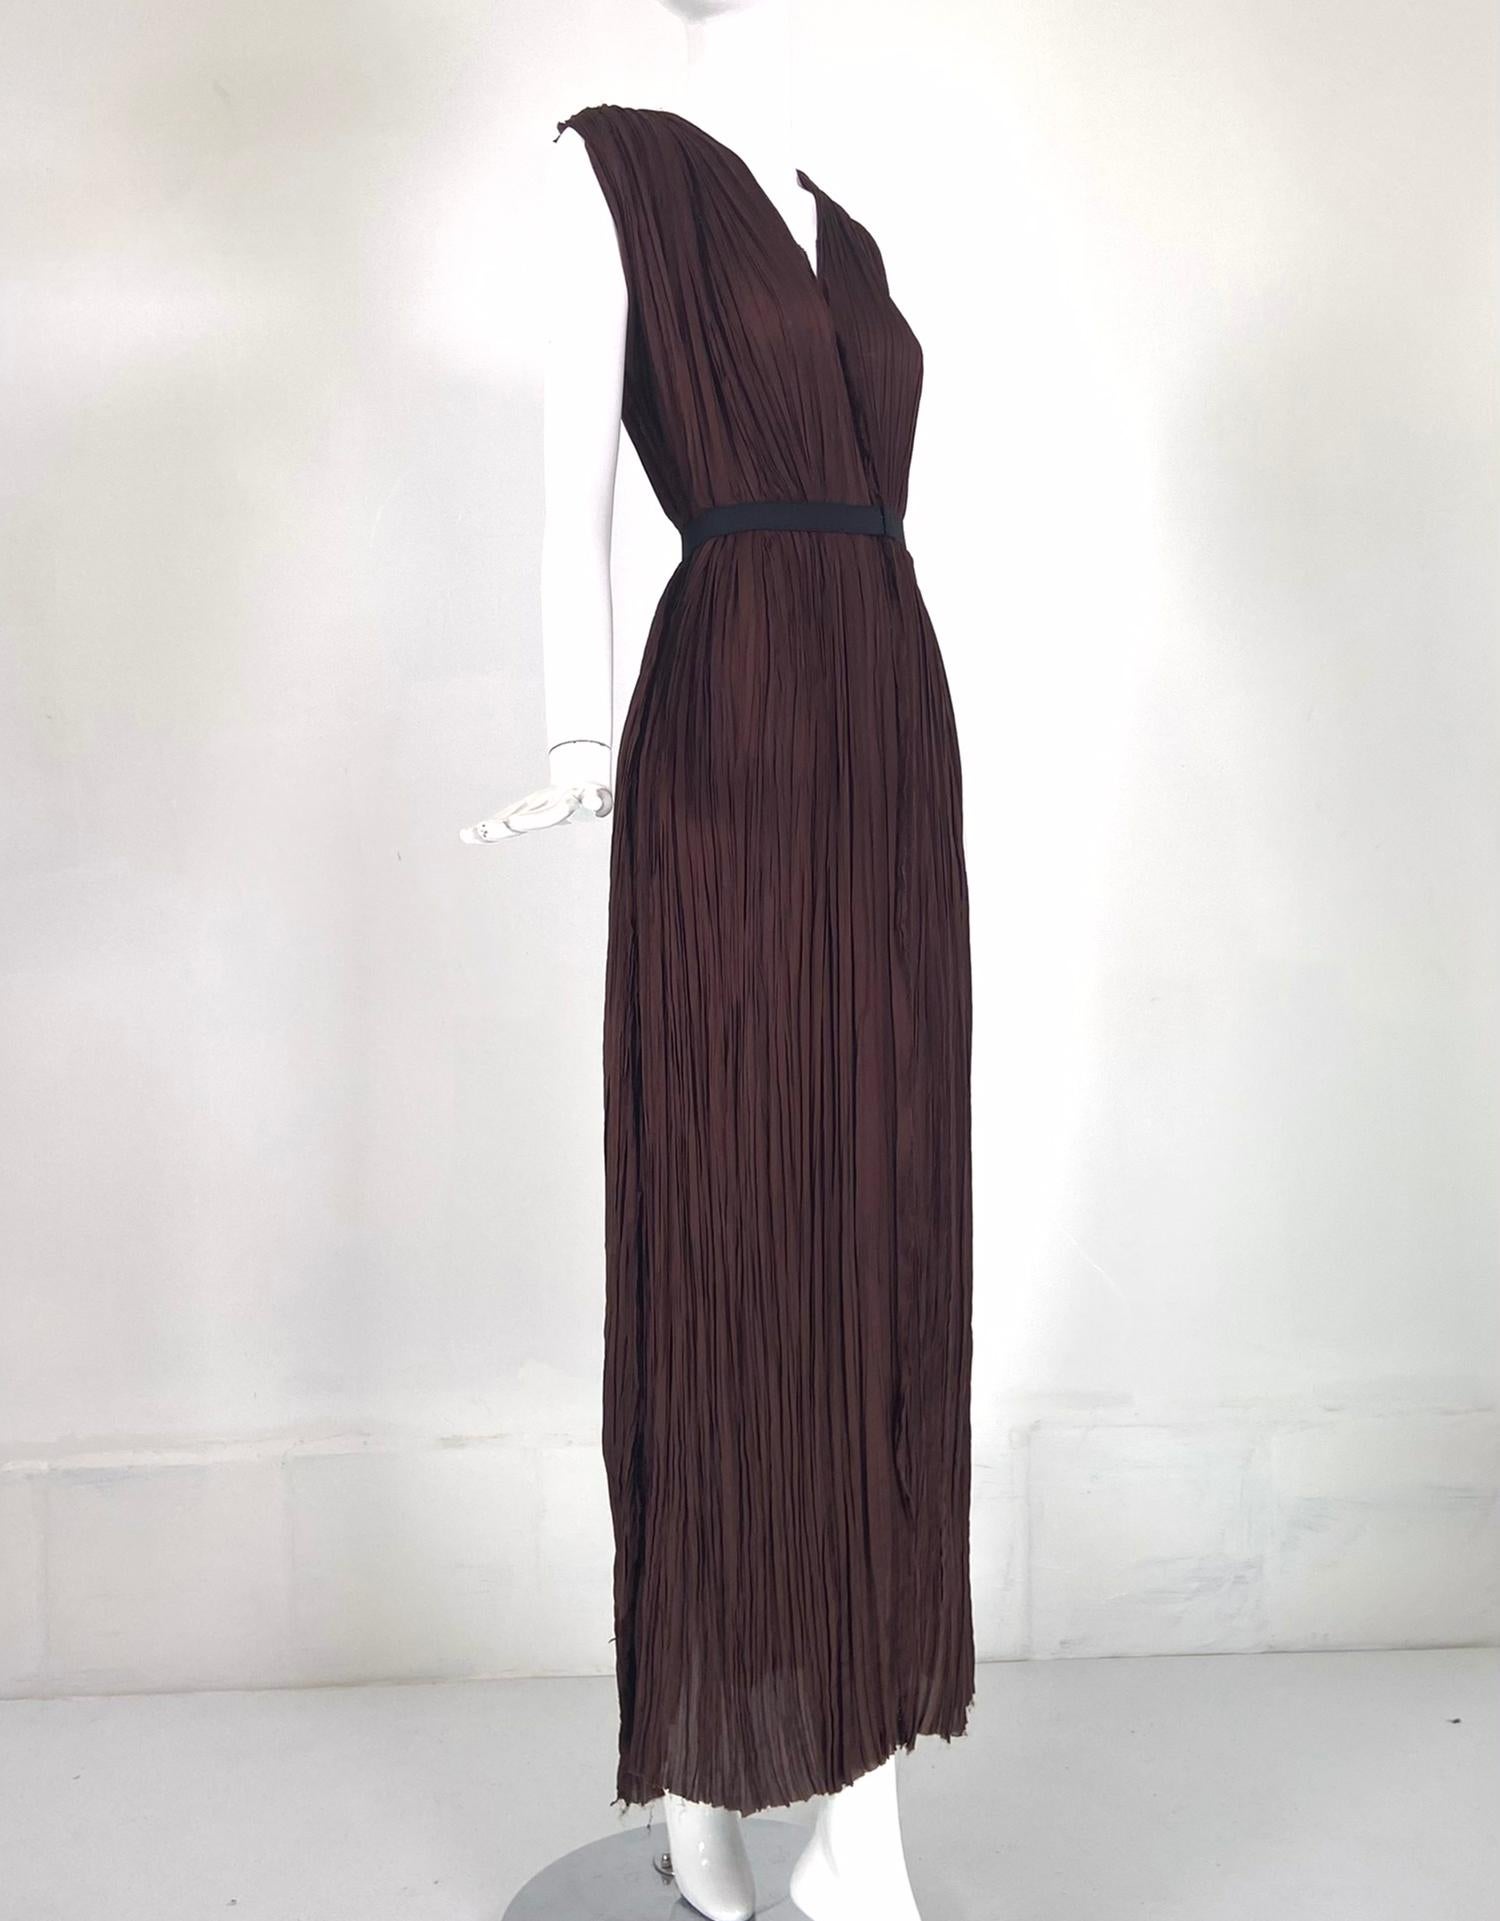 Lanvin Ete' 2005 Fortuny style pleated V neck, sleeveless maxi dress in chocolate brown. This statement making dress was designed by Alber Elbaz, it features raw seams & edges, a V neckline and comes with a black elastic belt that closes with a